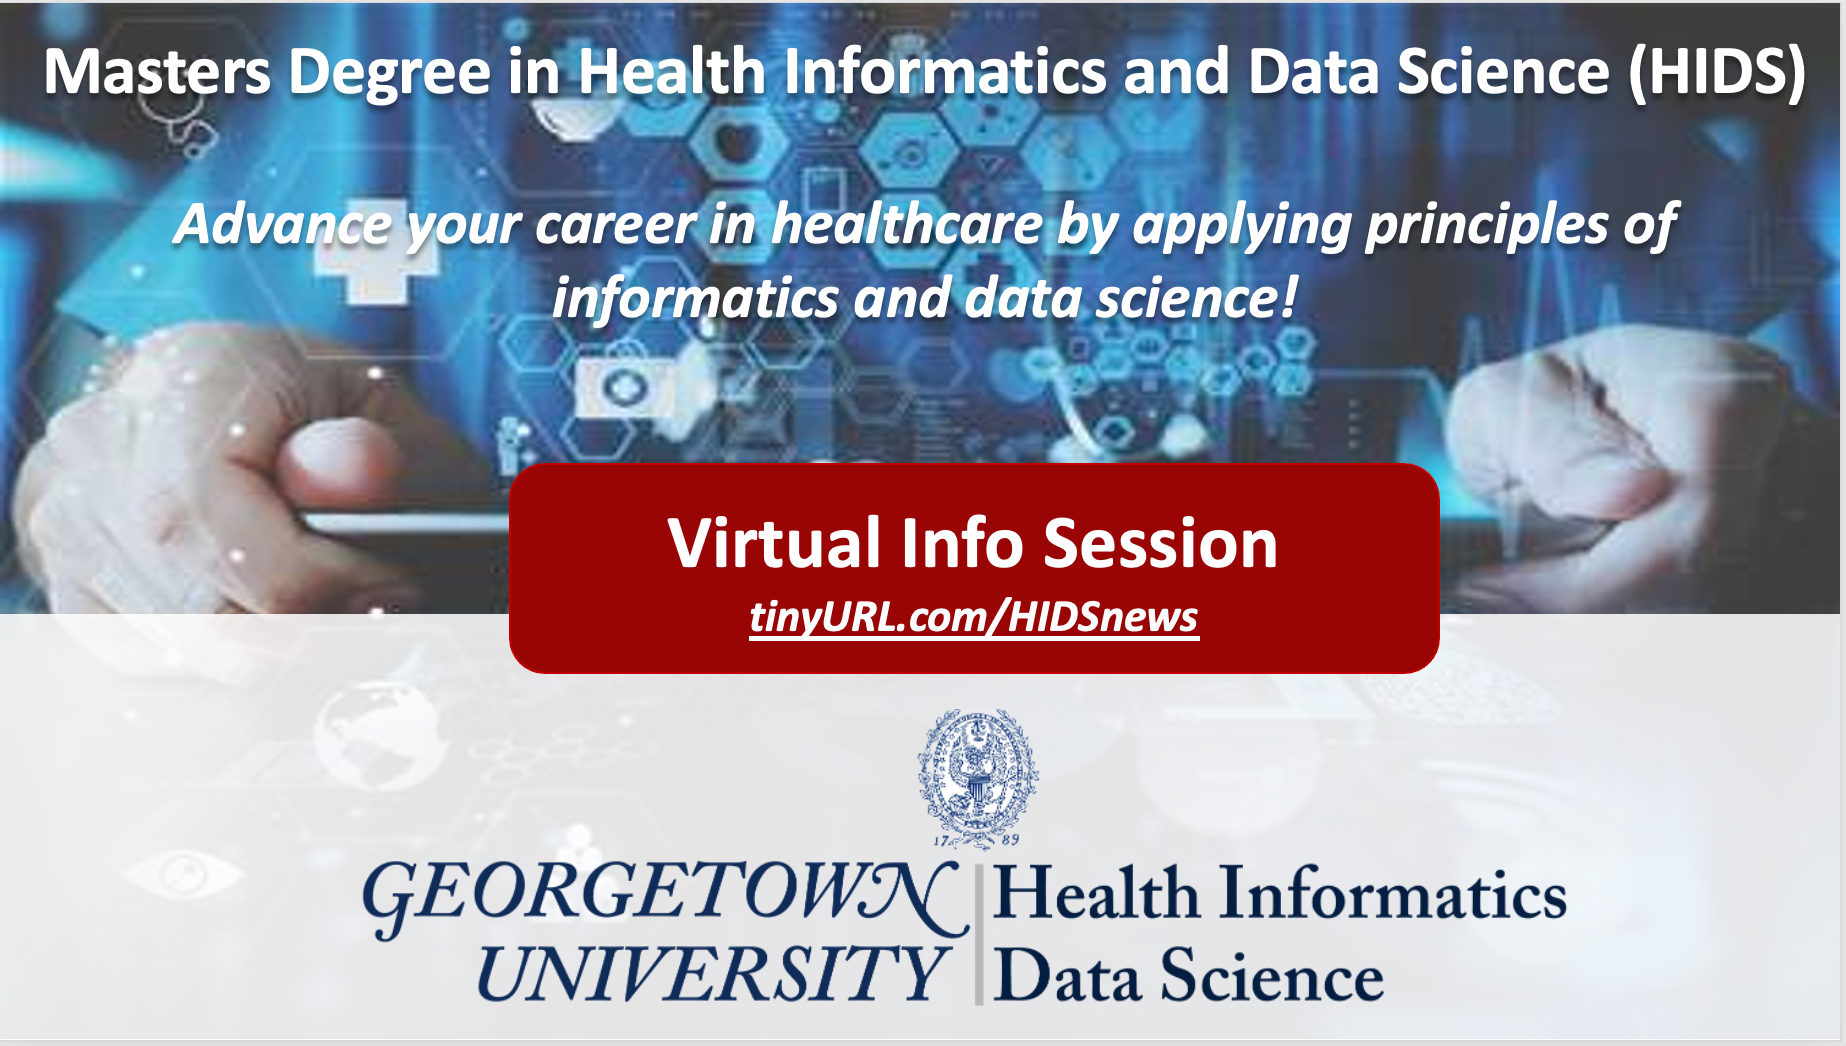 Join our virtual info session